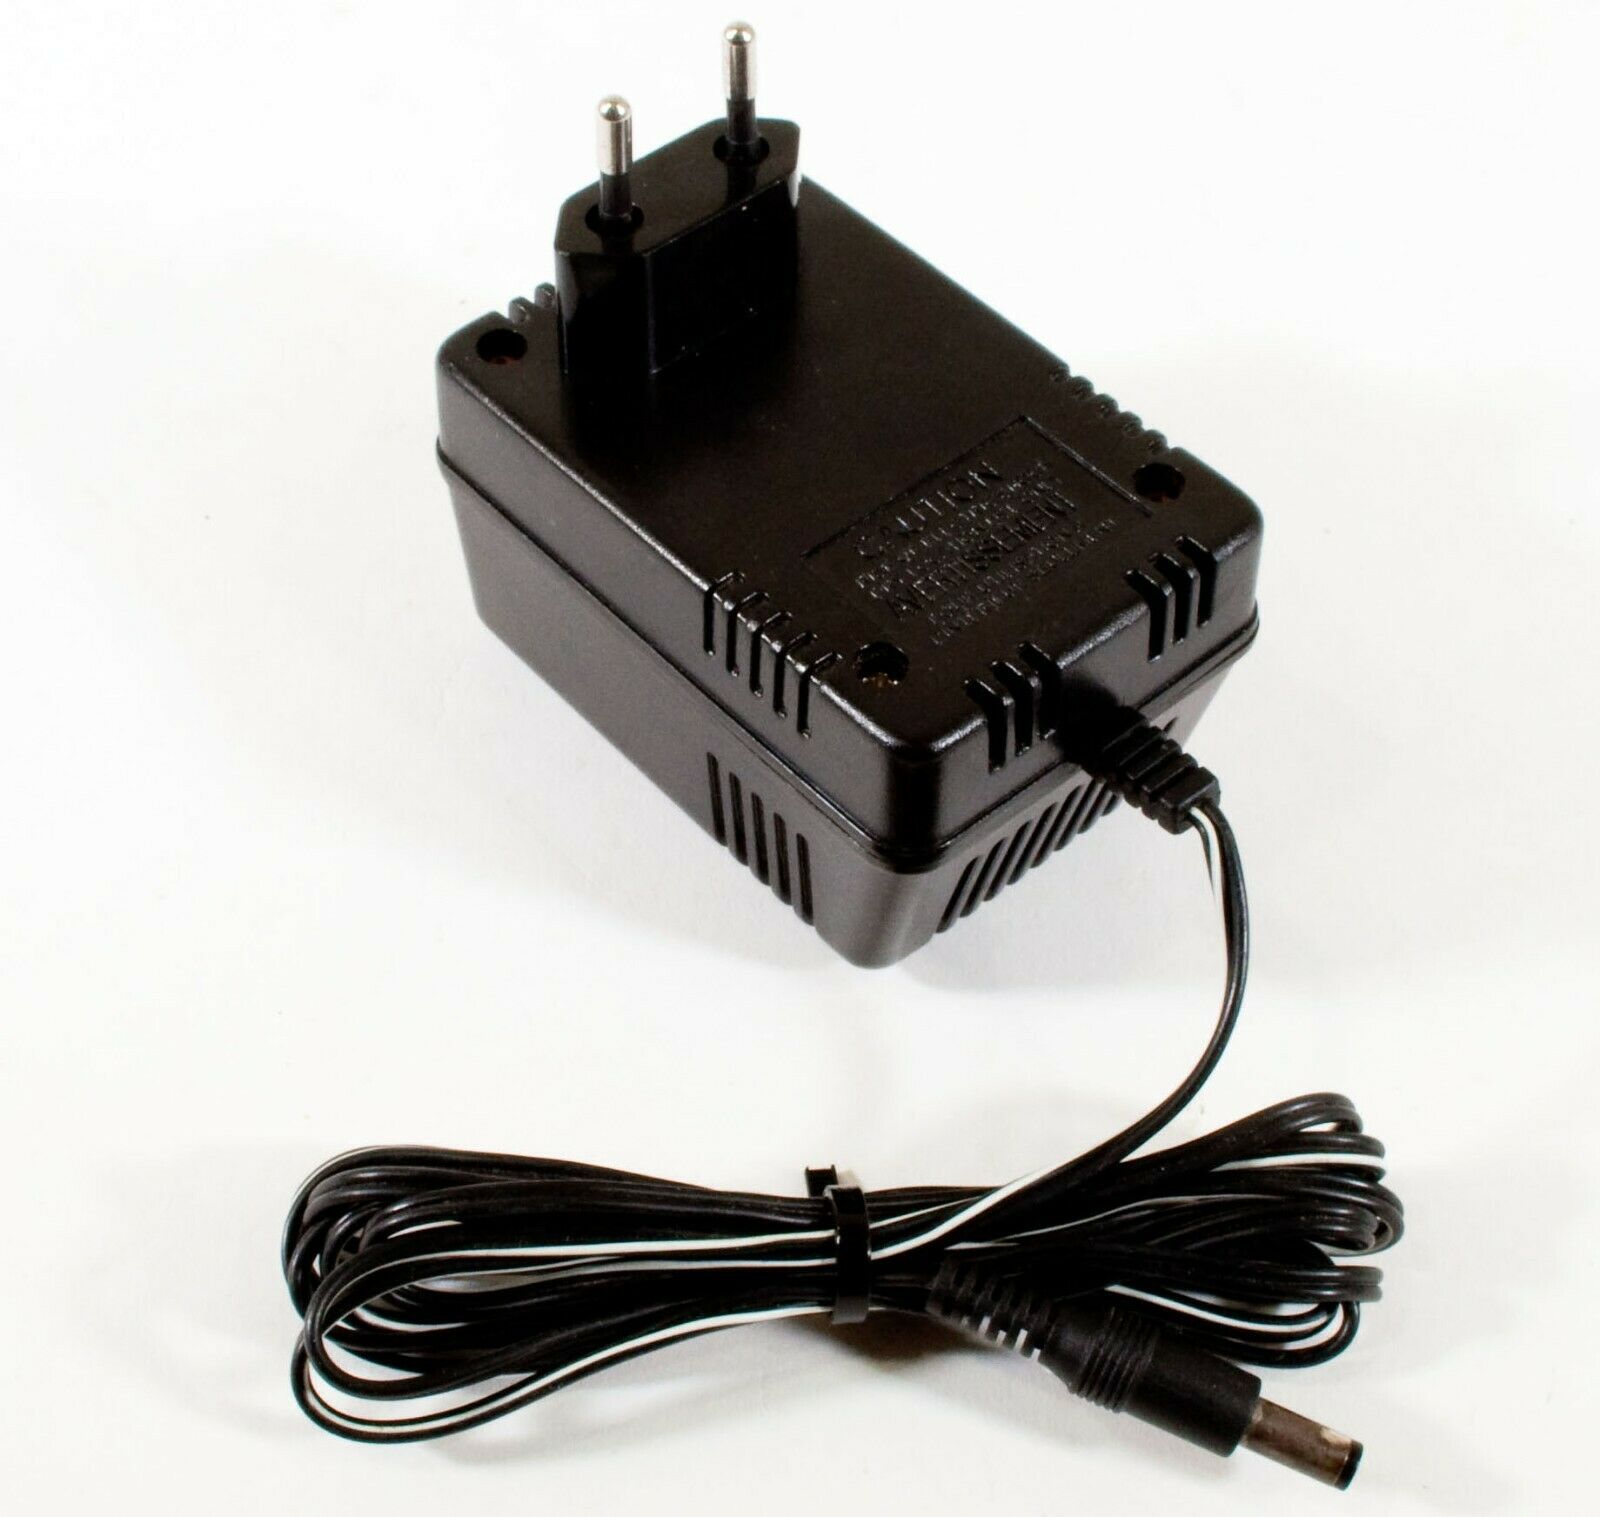 SY SY-09090-GS AC Adapter 9V 900mA Original Power Supply Charger Europlug Output Current: 900 mA MPN: SY-09090-GS